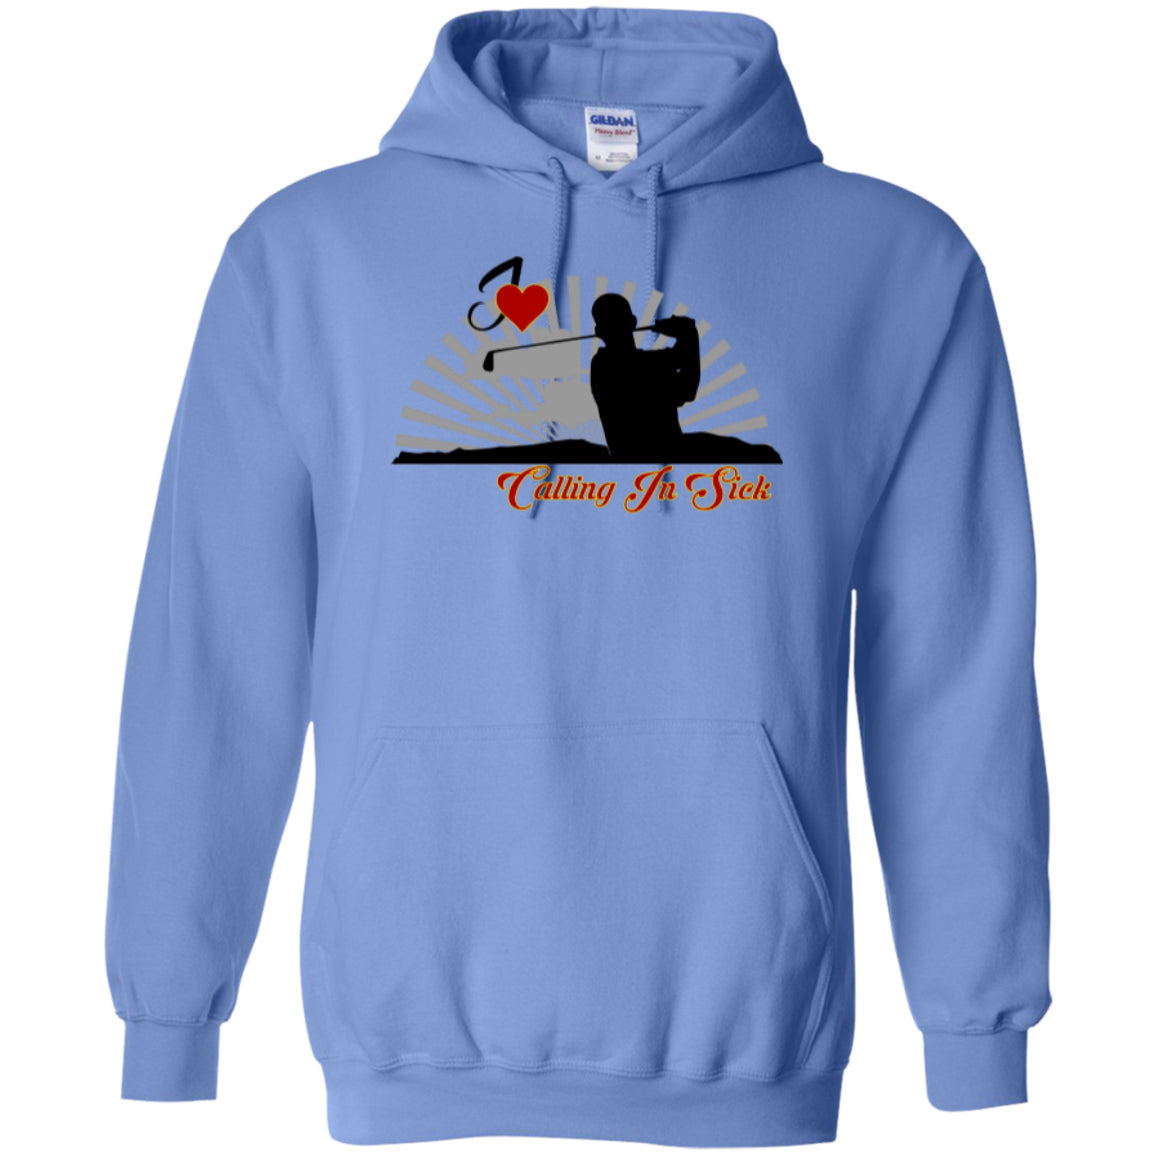 Golf - Love Calling In Sick -Pullover Hoodie 8 oz - GoneBold.gift